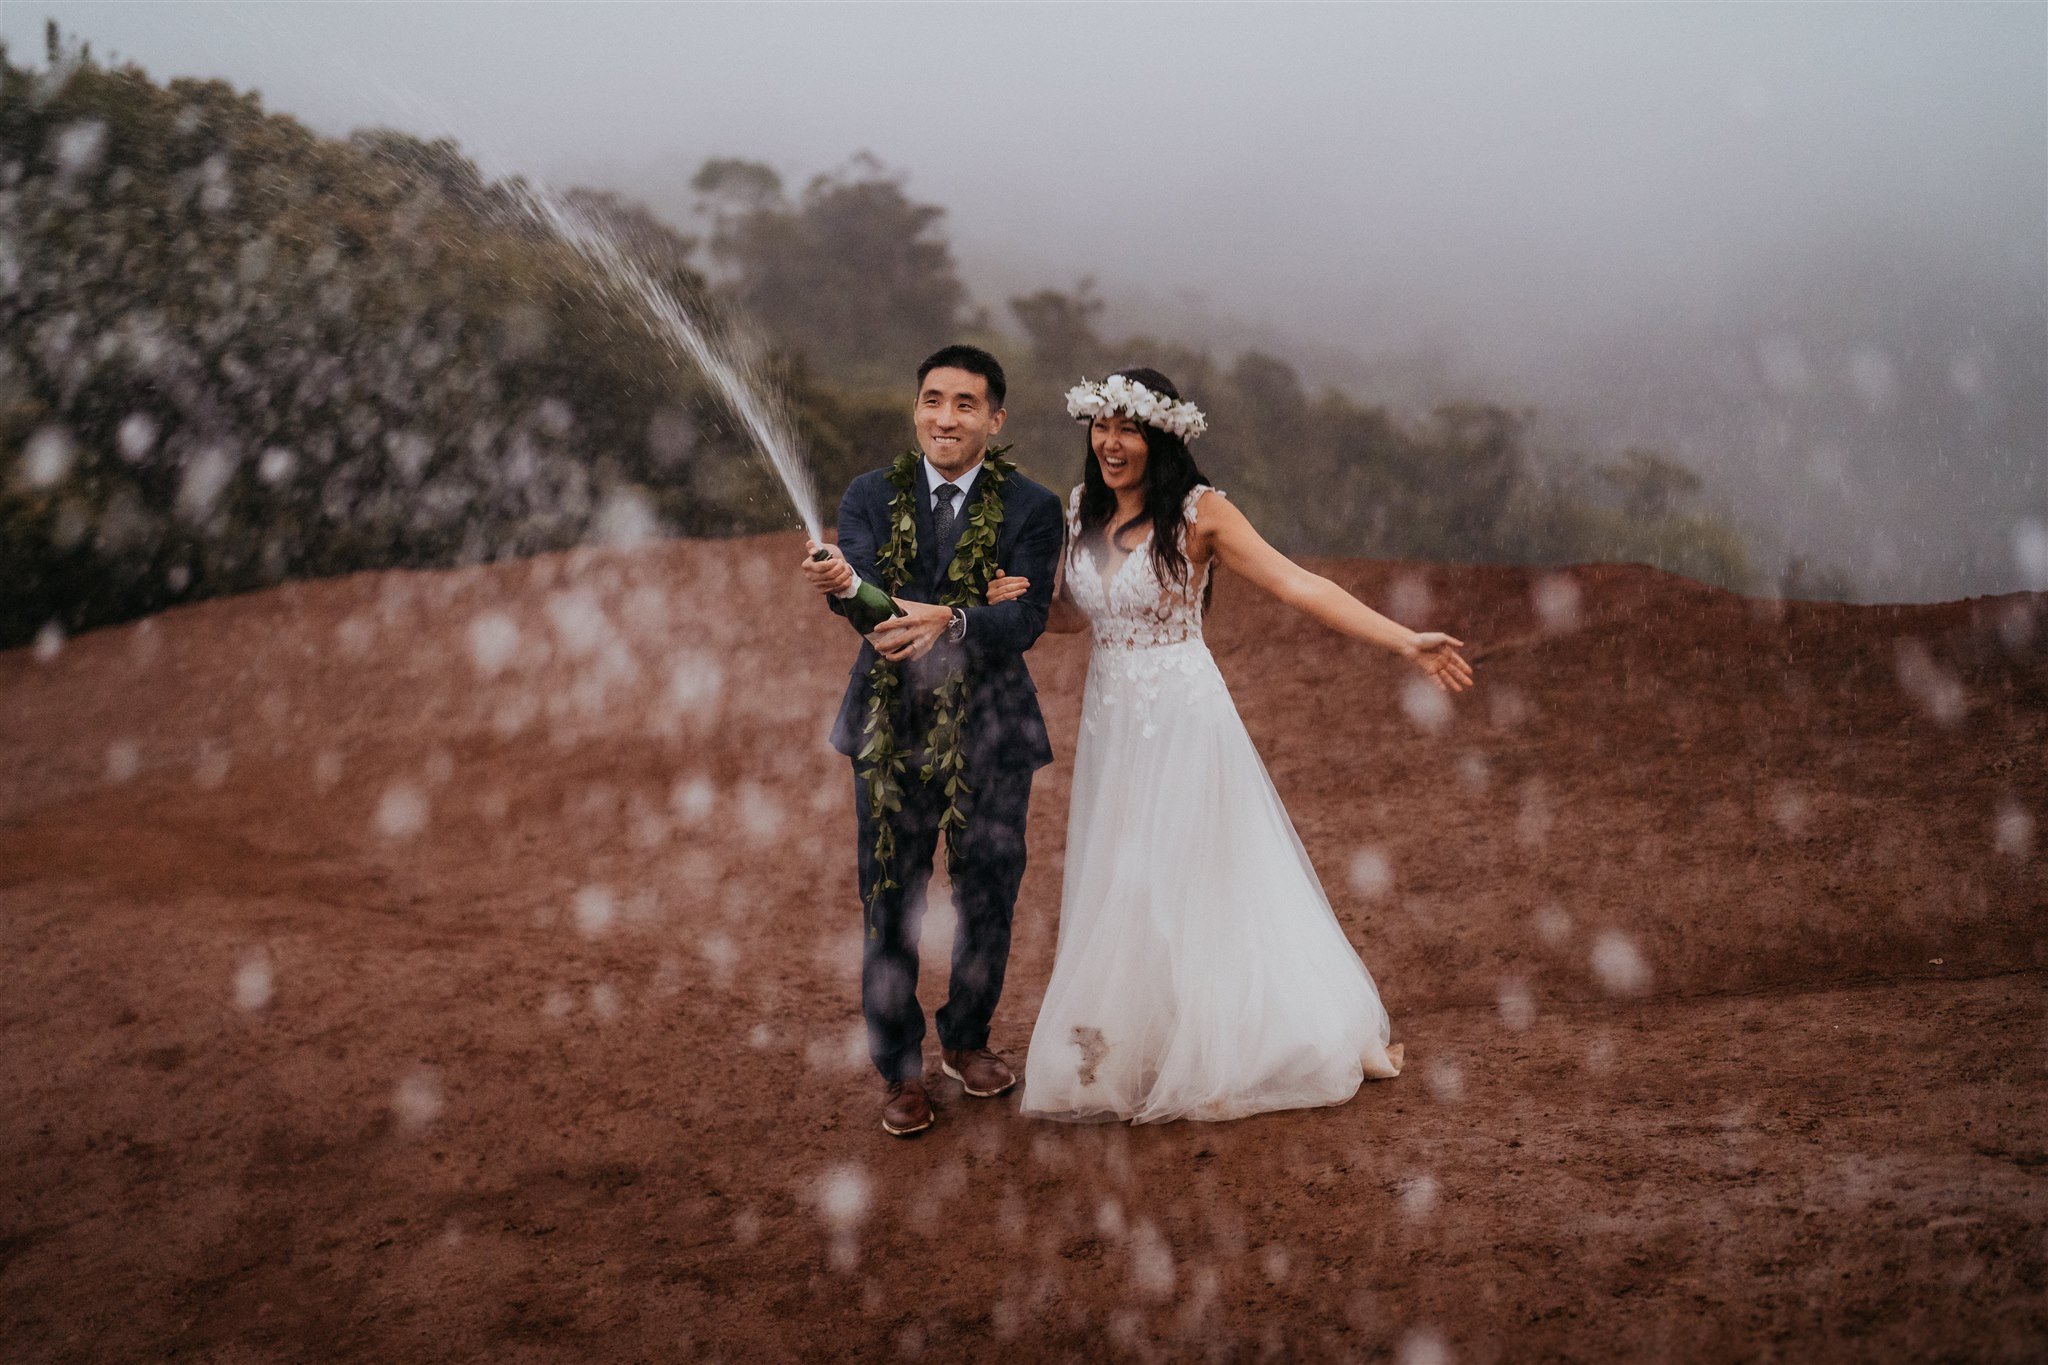 Bride and groom spraying champagne to celebrate their elopement